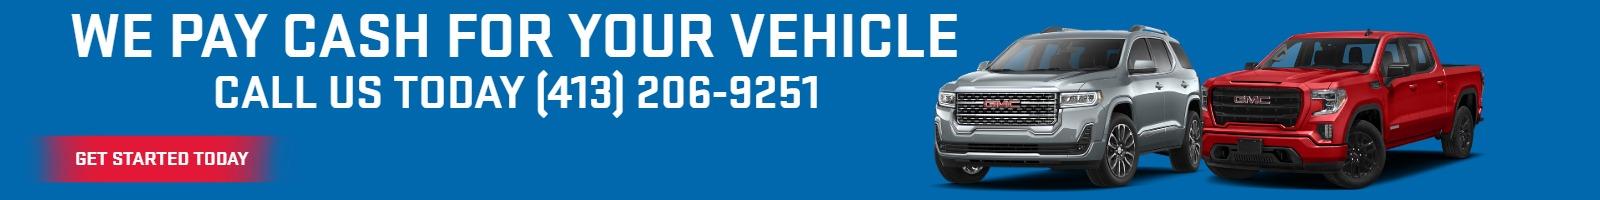 WE PAY CASH FOR YOUR VEHICLE - CALL US TODAY (413) 206-9251